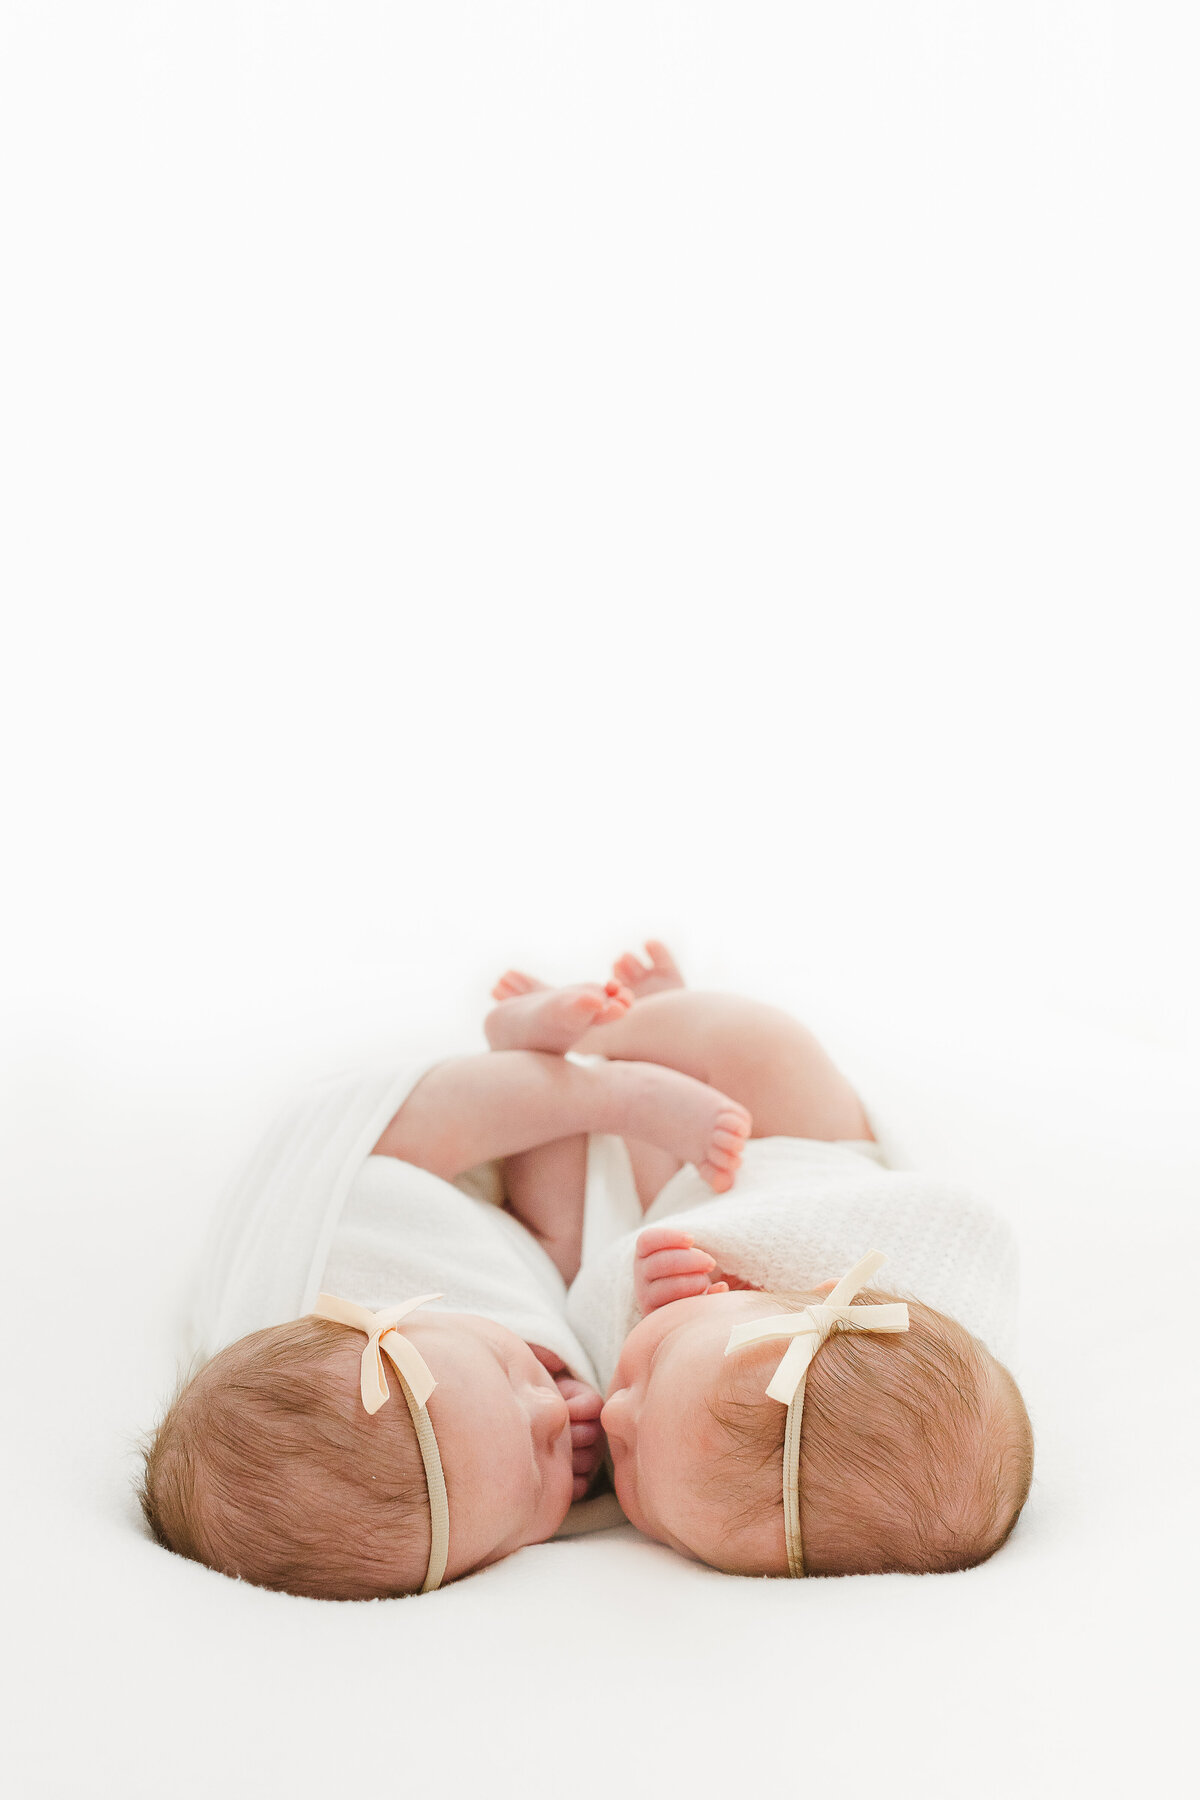 Twin baby girls cuddling nose to nose on a white blanket at a Northern Virginia Newborn Photography session